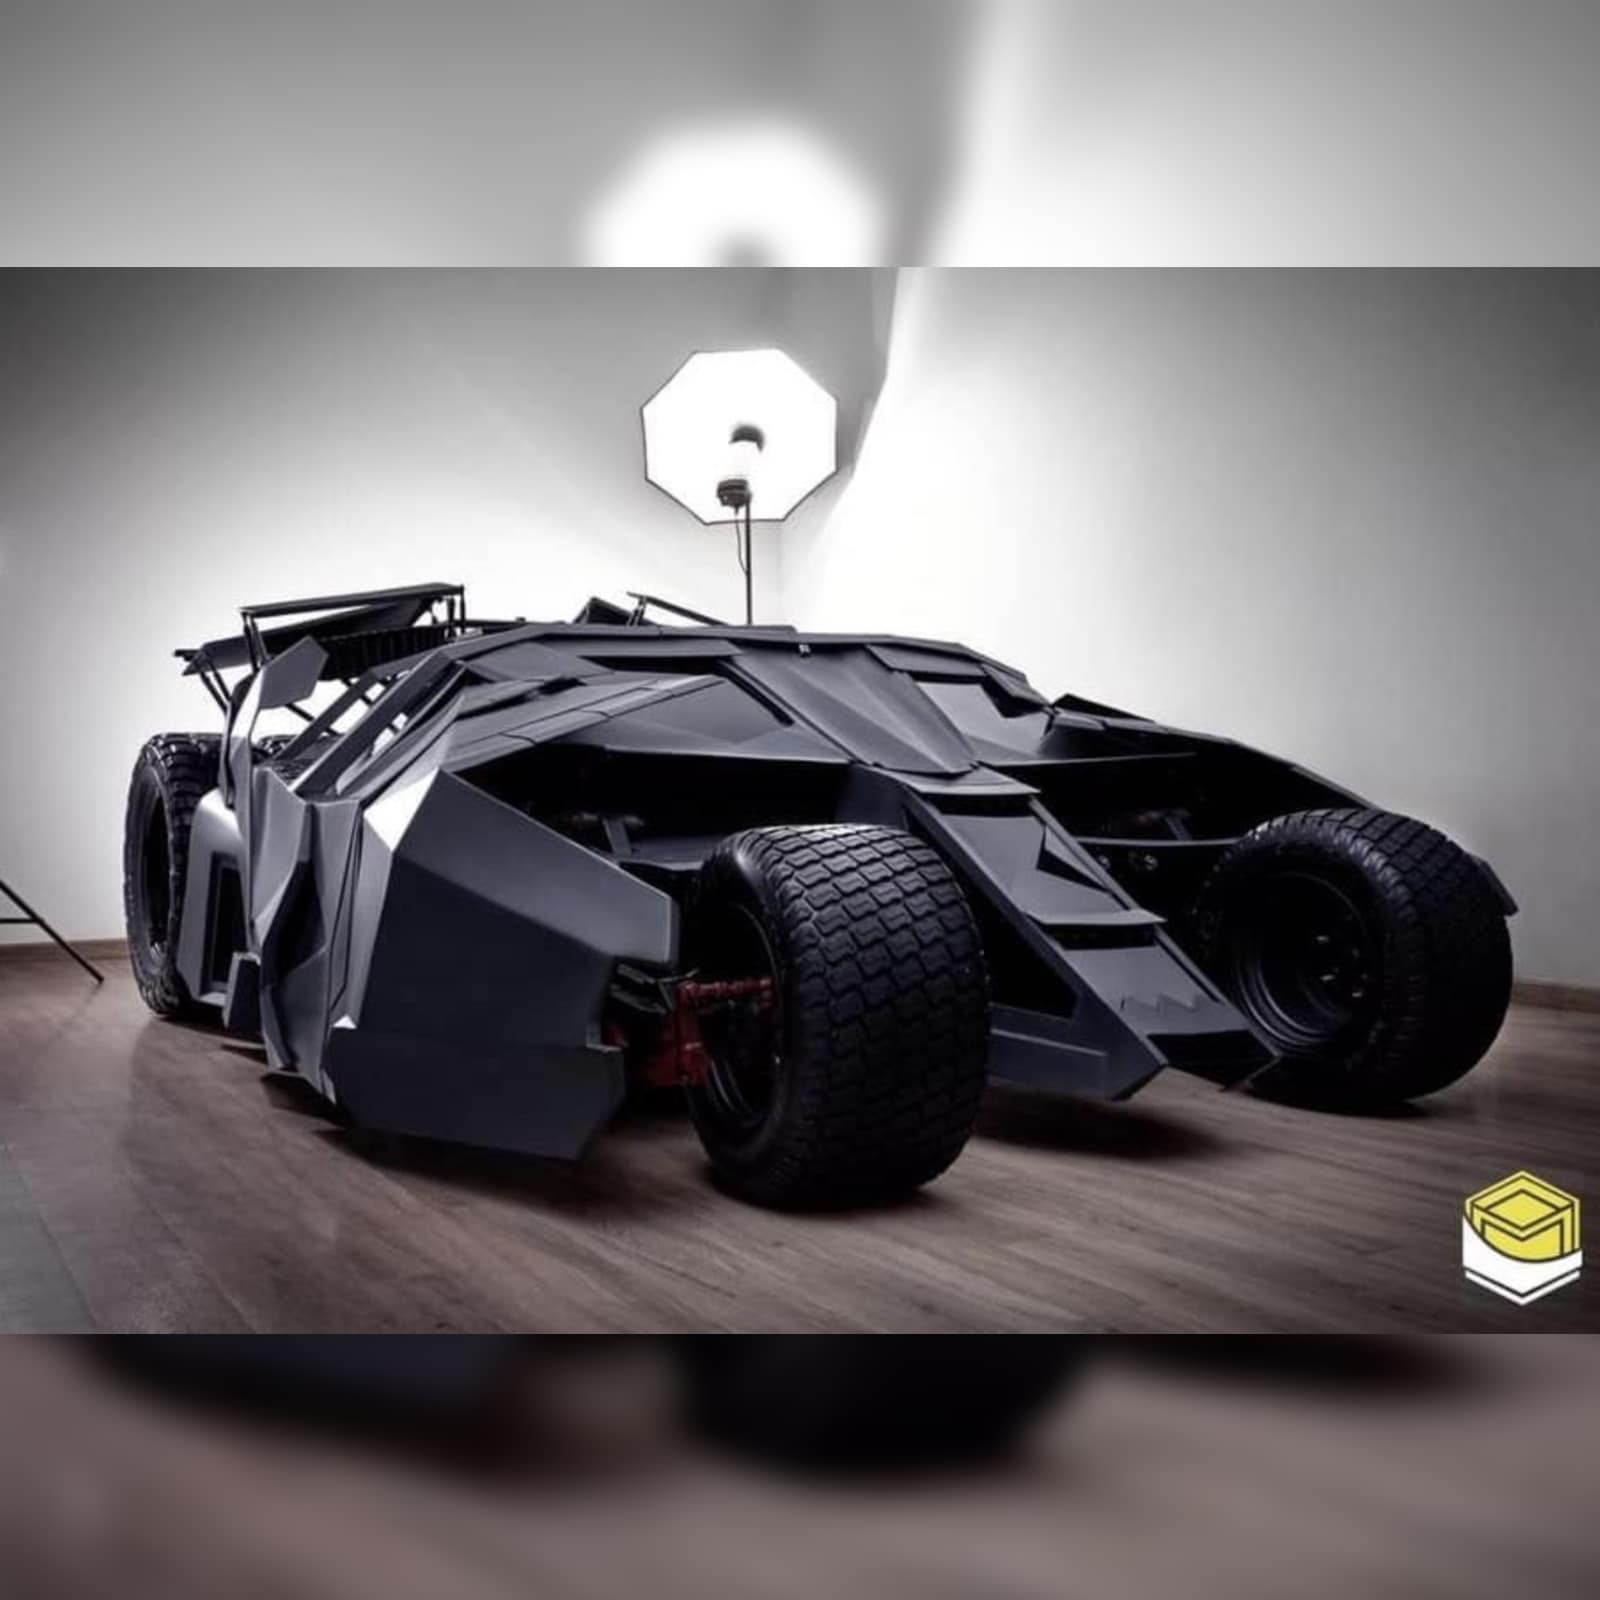 Batmobile Goes Electric! Here's The 23-Year-Old Who Created It - News18